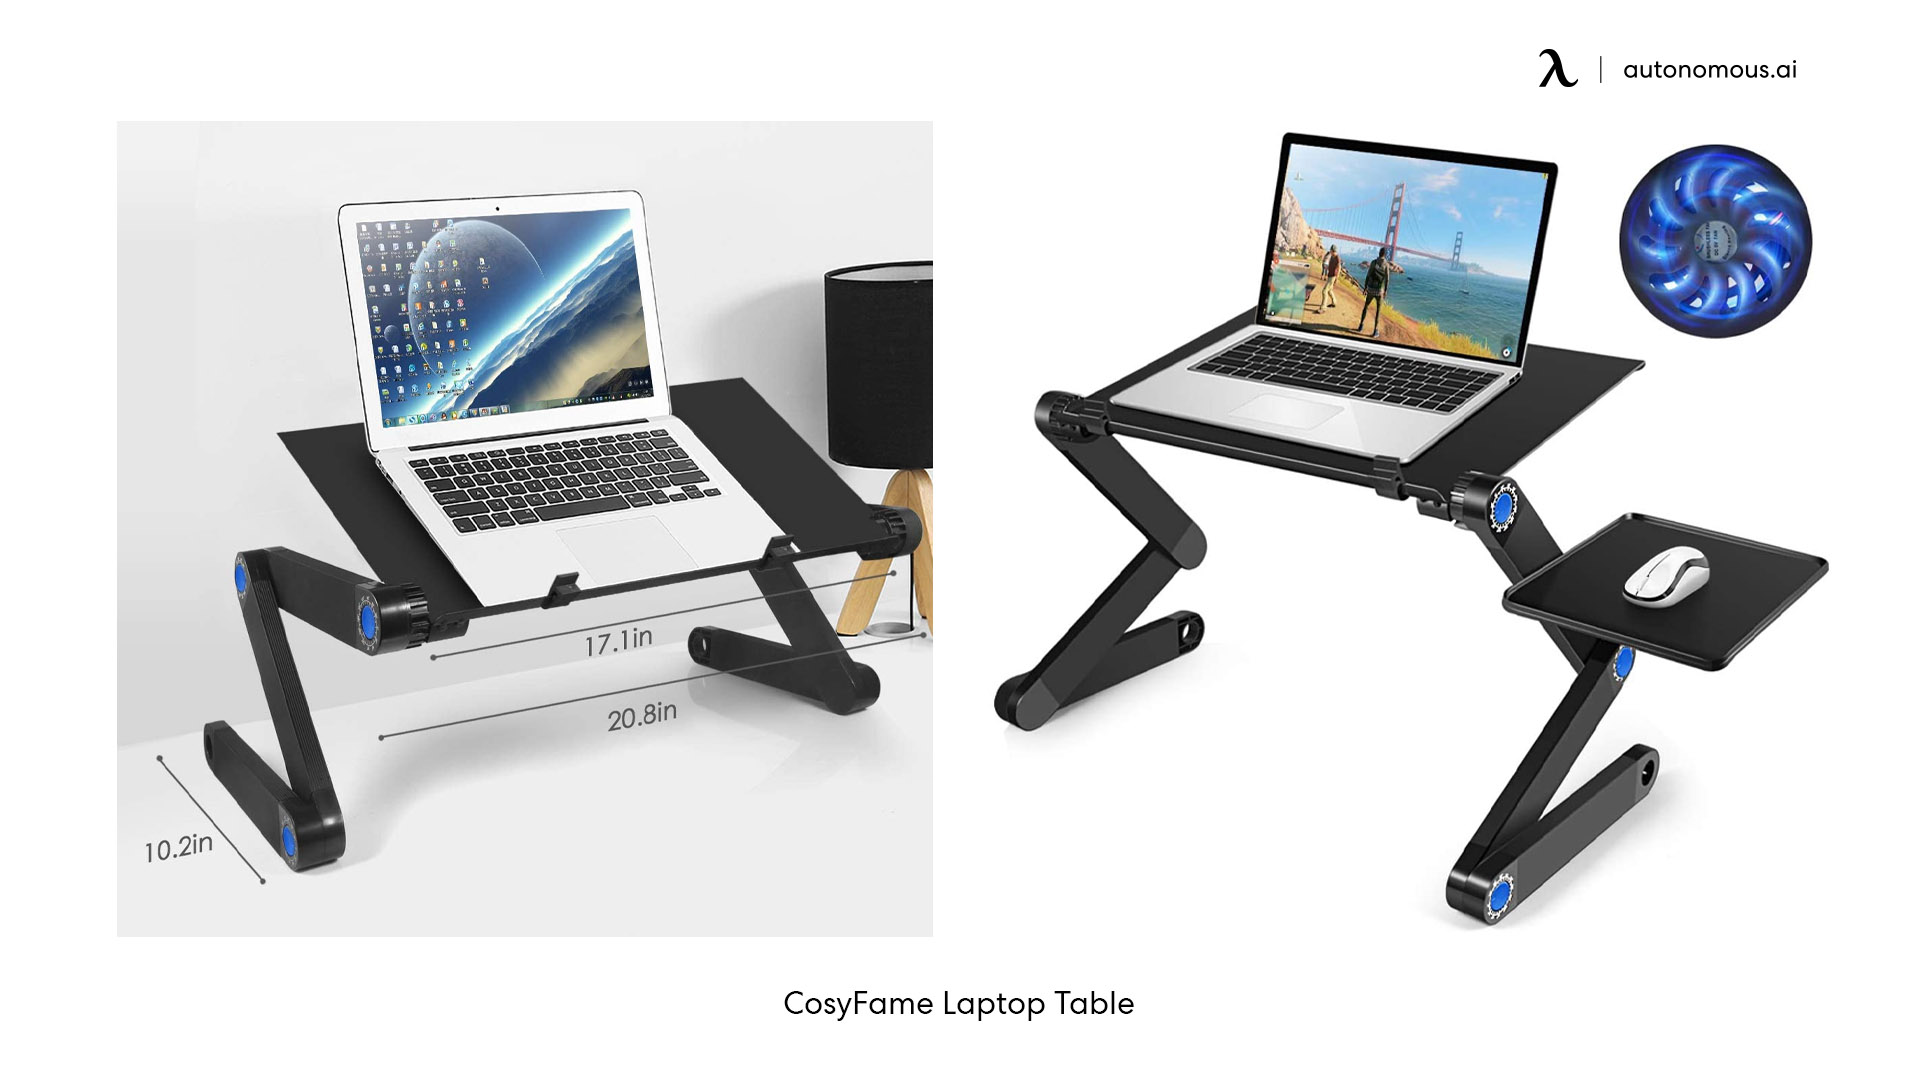 CosyFame Laptop Table